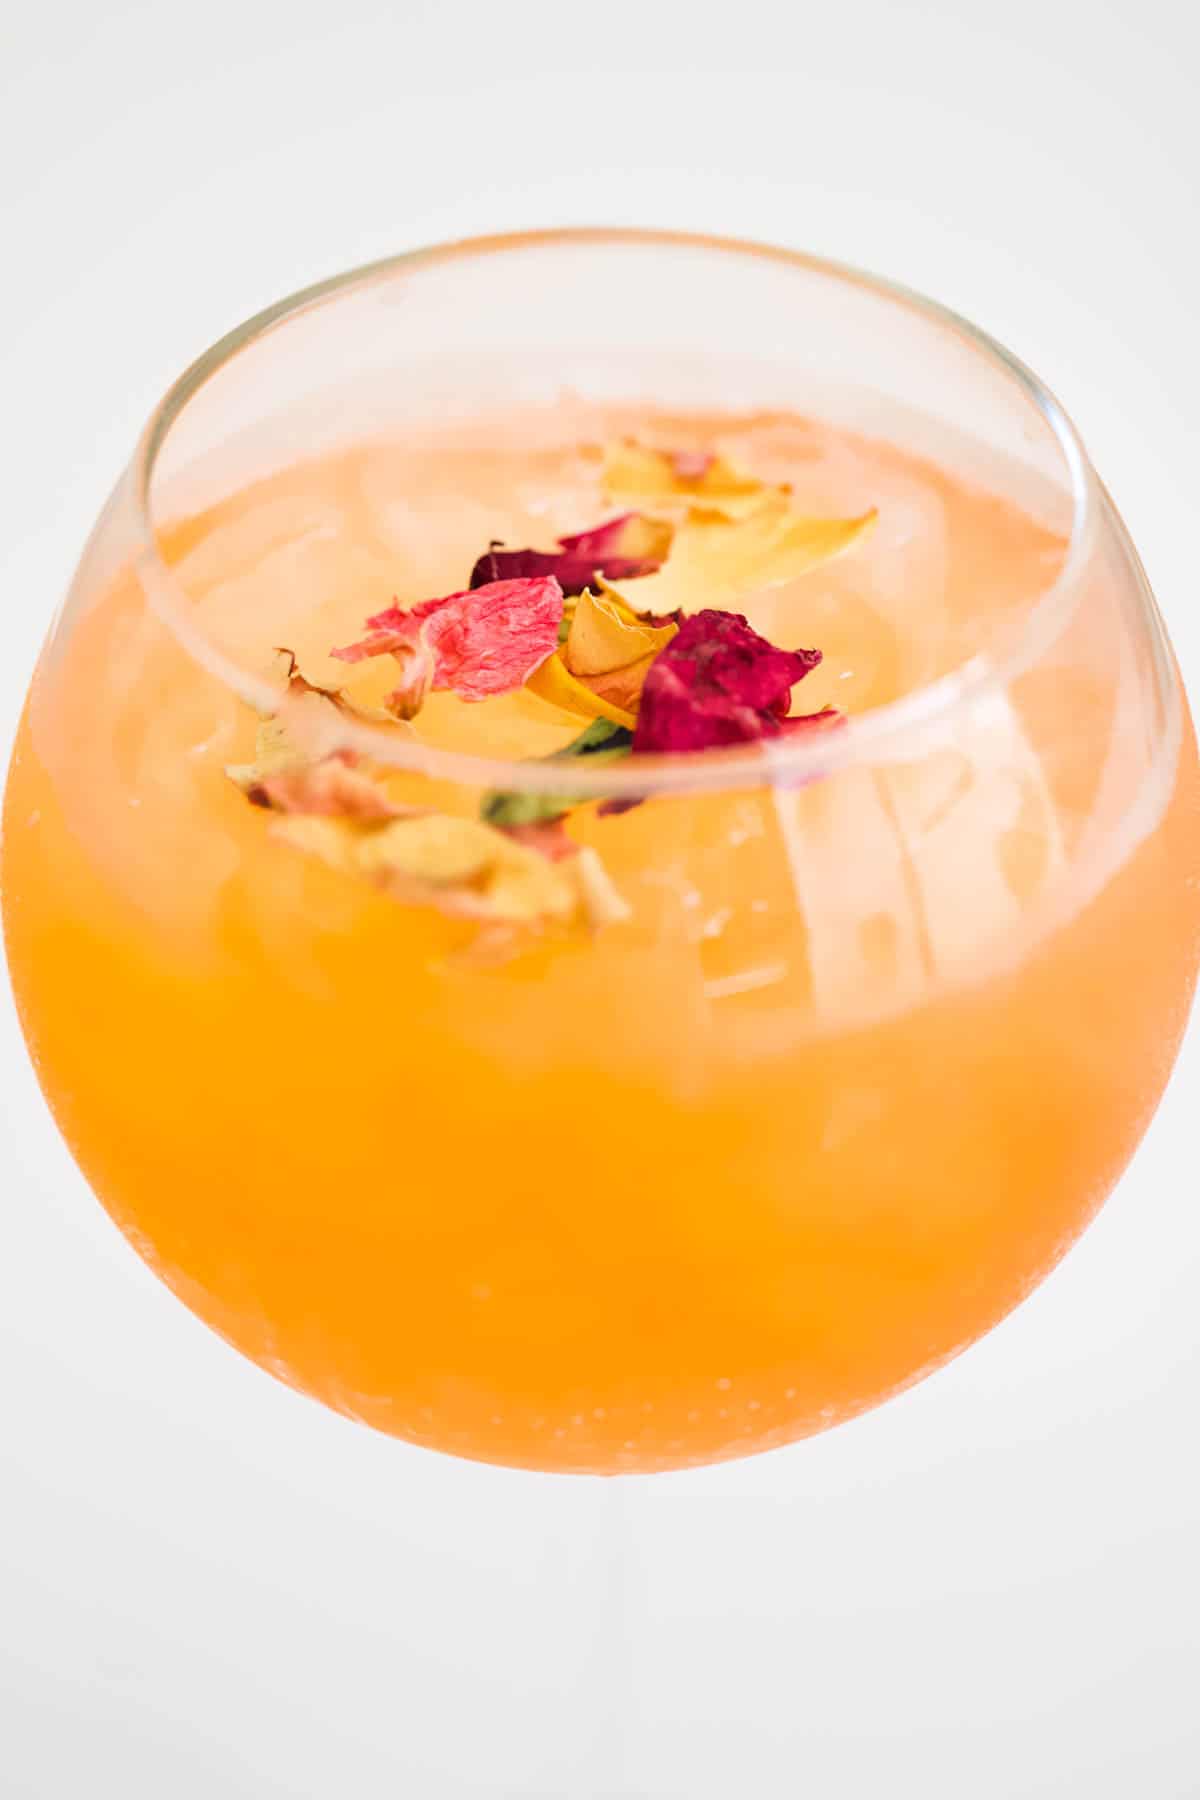 Dried flower petals floating on the top of a cocktail in a spritz glass.